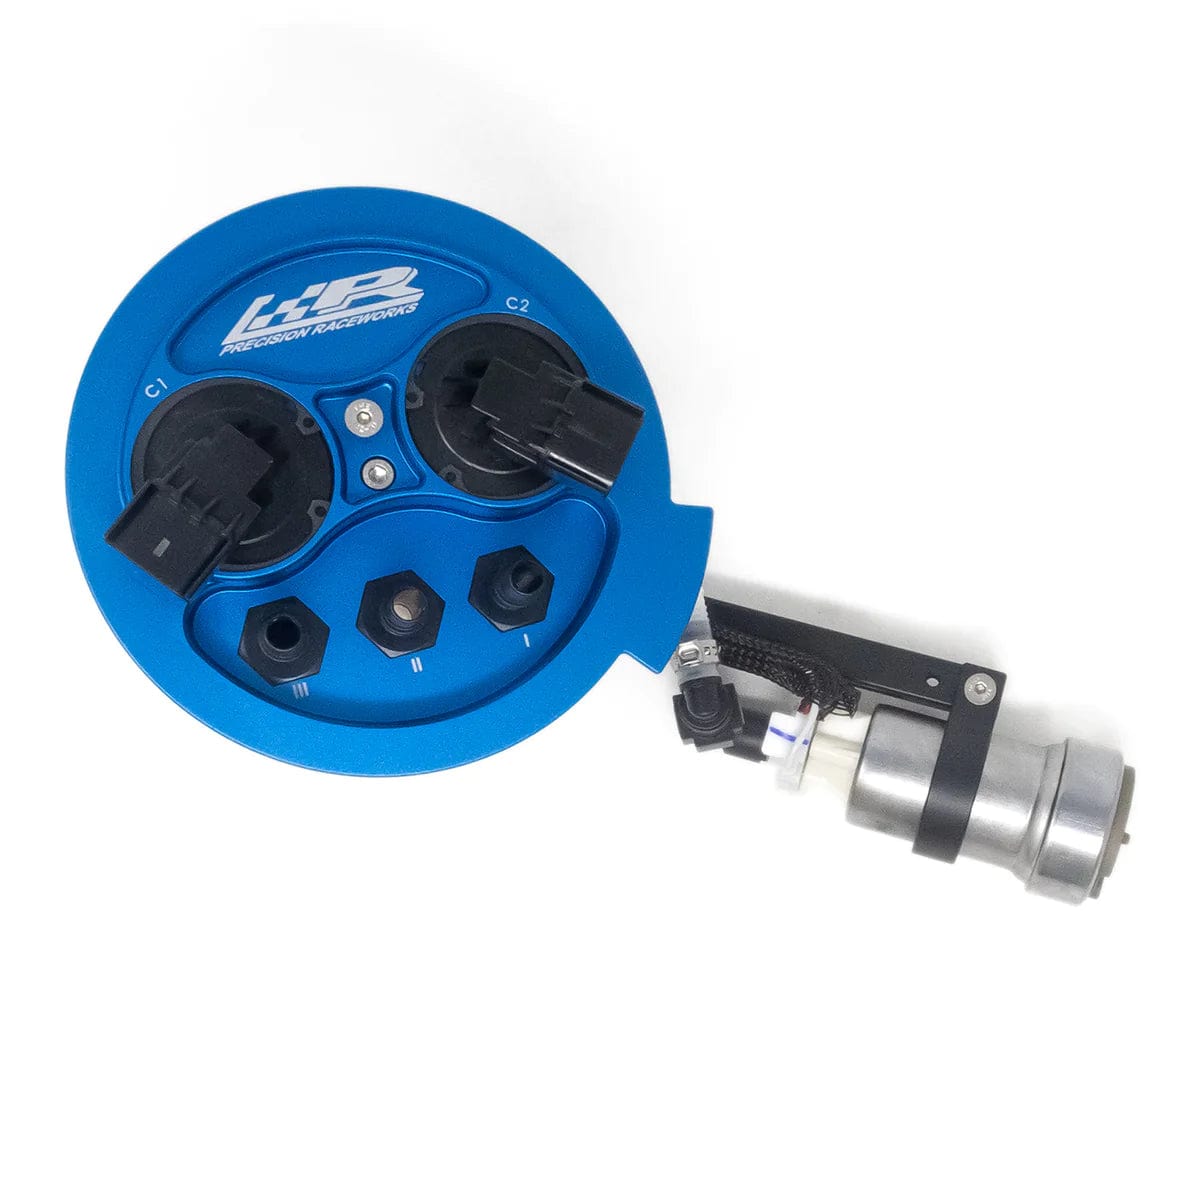 Kies-Motorsports Precision Raceworks Precision Racewerks G8x/G2x Stand Alone Auxiliary Fuel System AFS.460